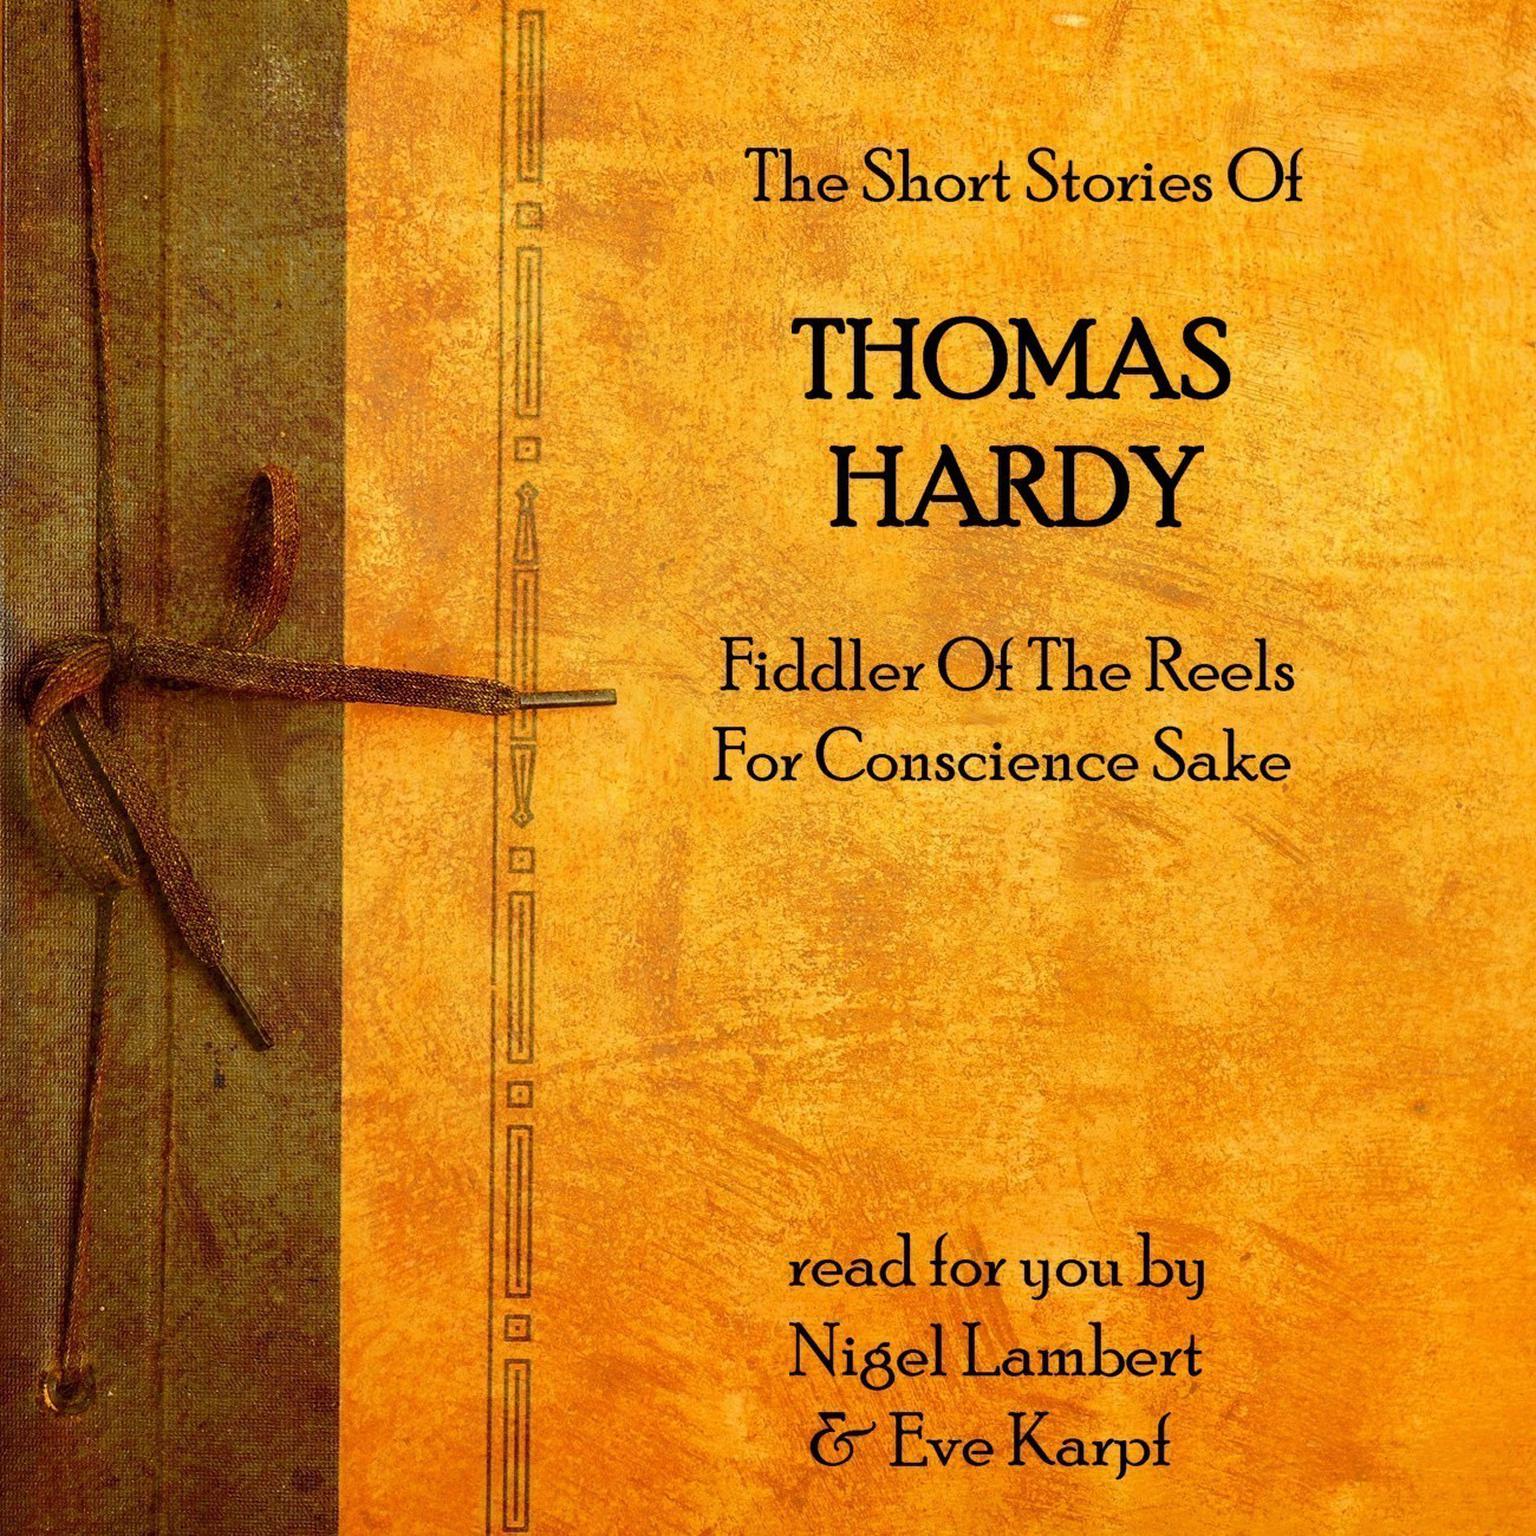 The Short Stories of Thomas Hardy: Fiddler of the Reels & For Conscience’ Sake Audiobook, by Thomas Hardy